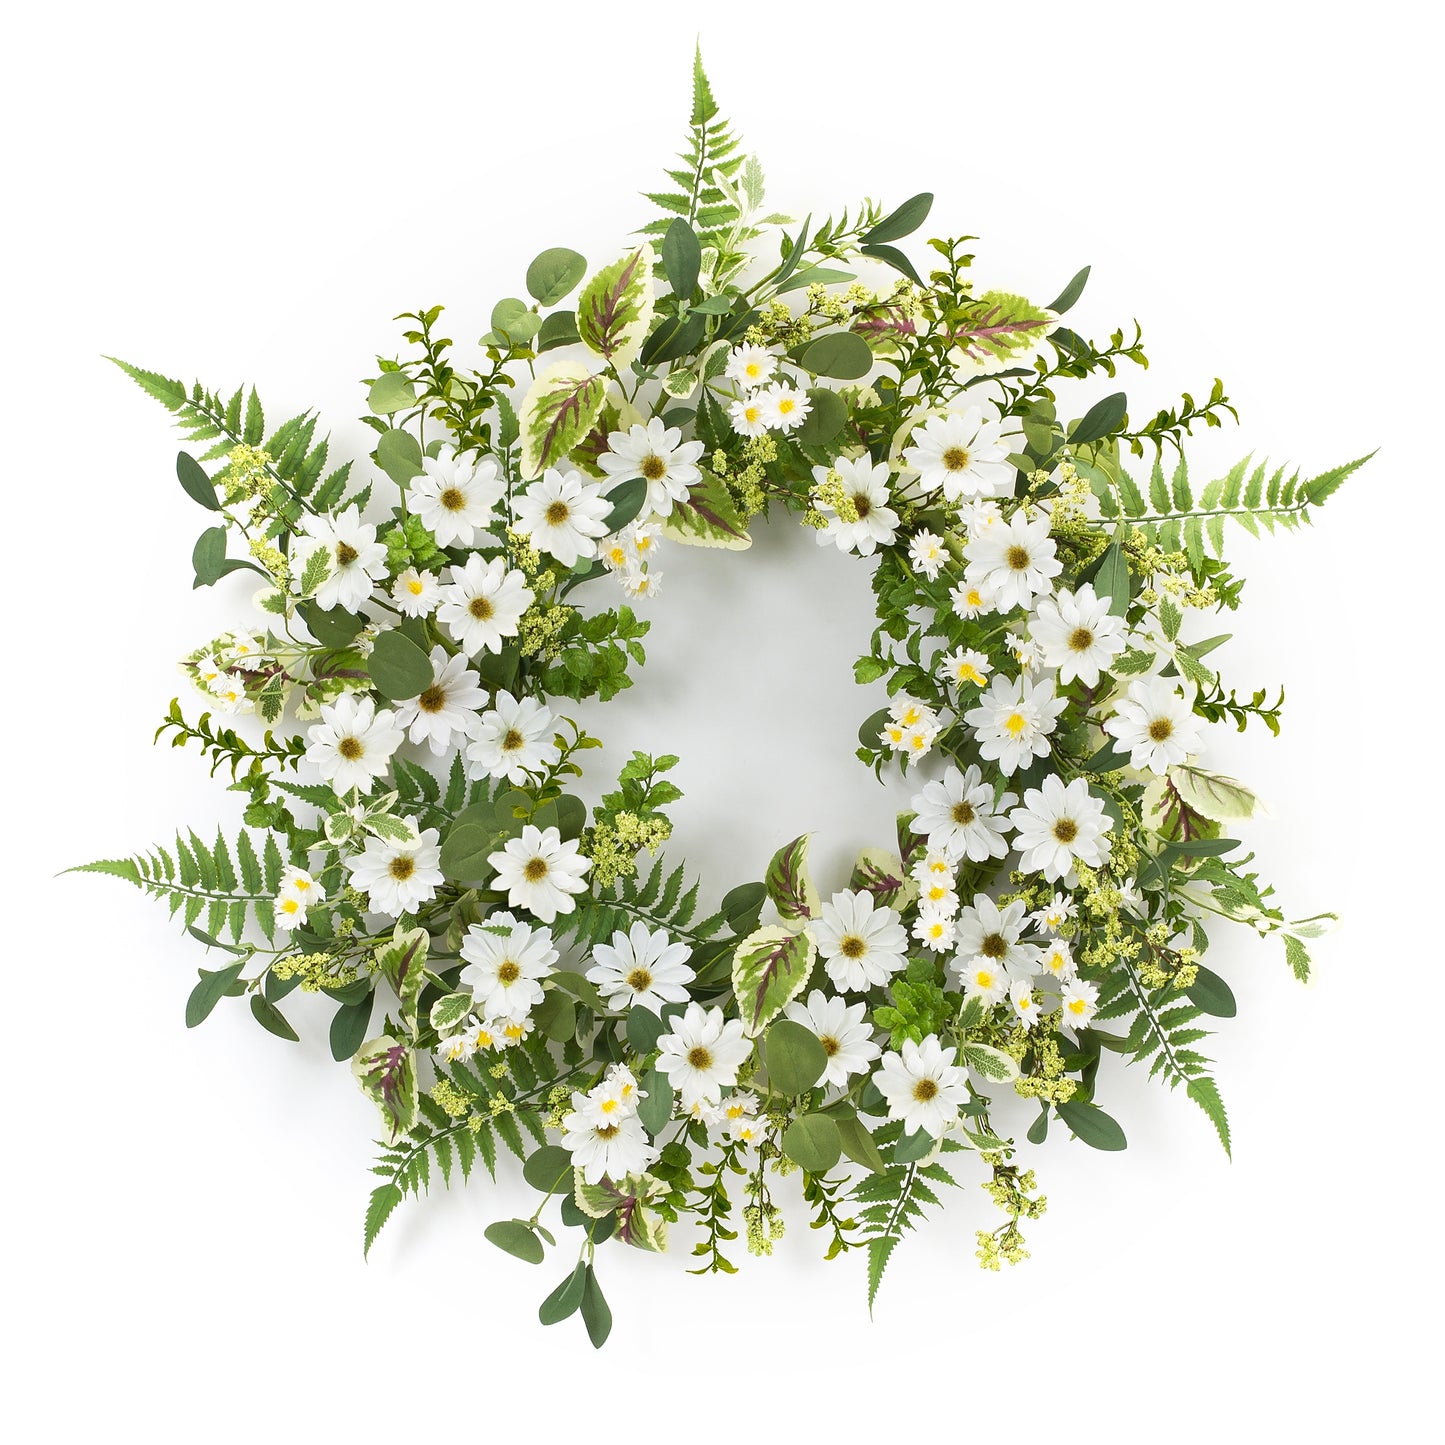 Mixed Fern and Daily Floral Wreath 22.5"D